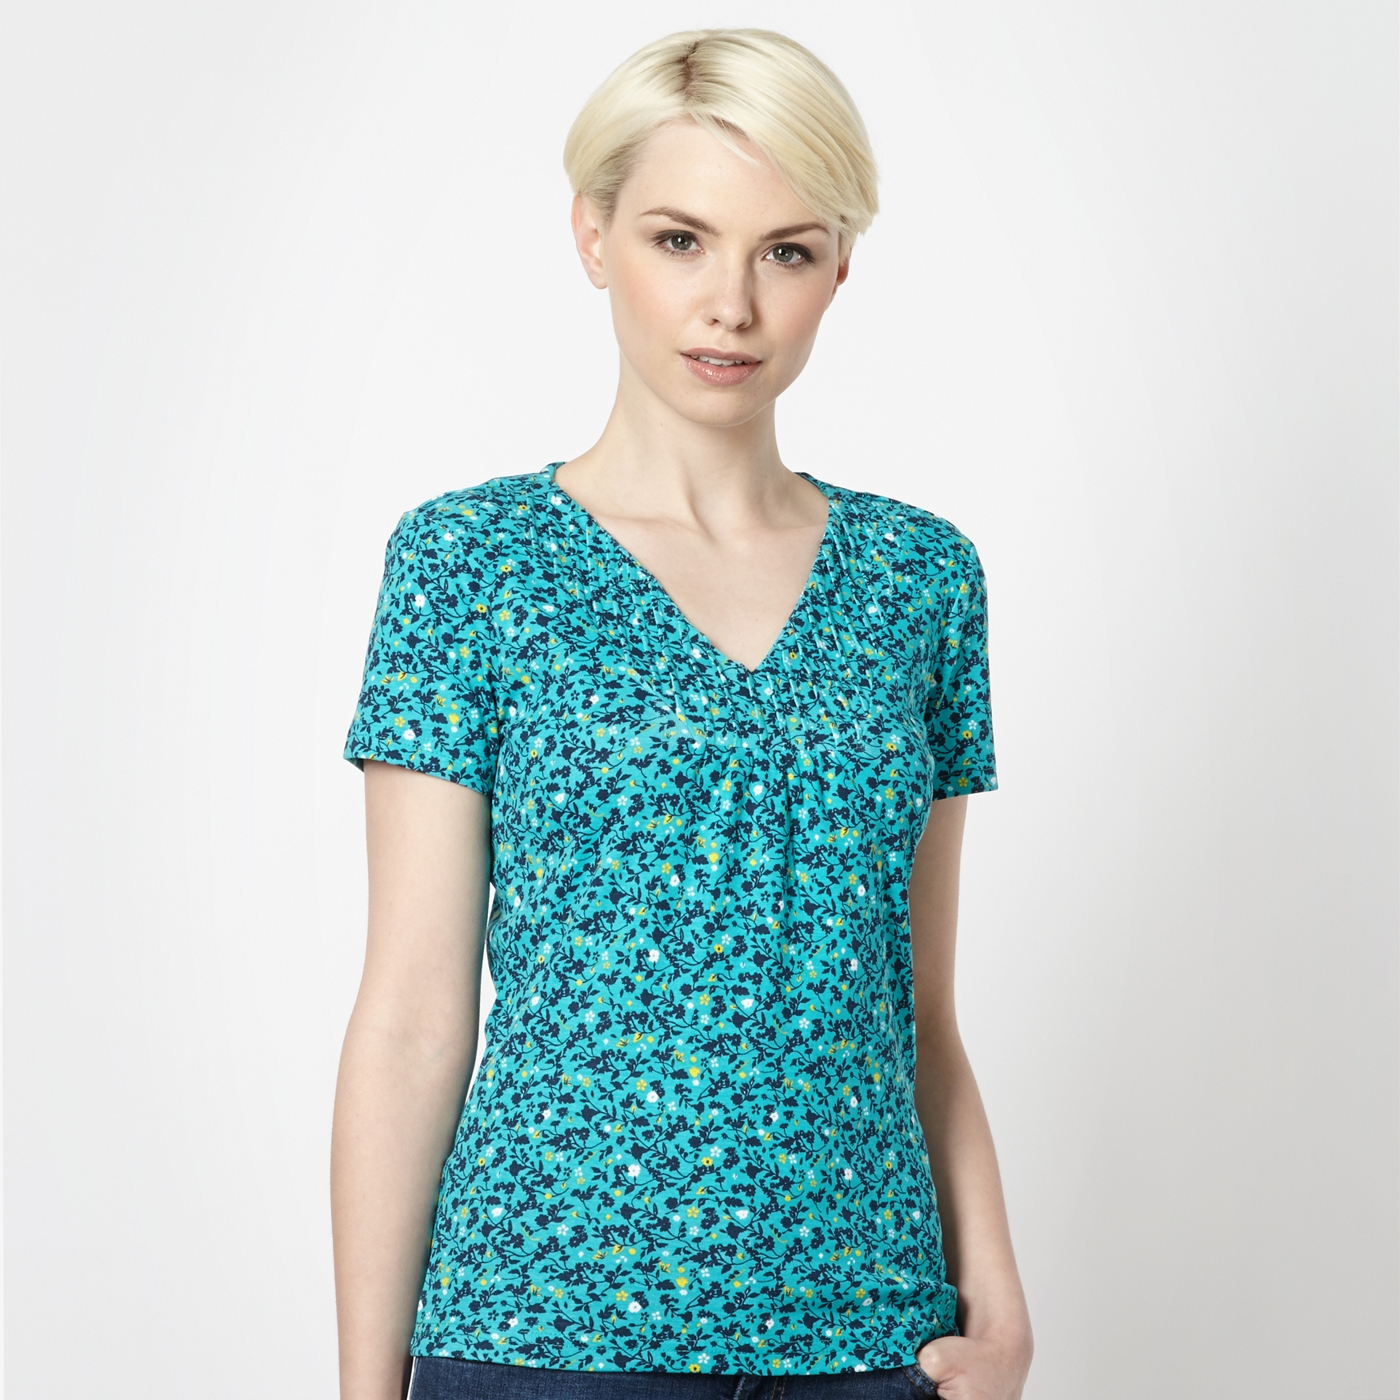 Maine New England Bright turquoise floral V neck t shirt